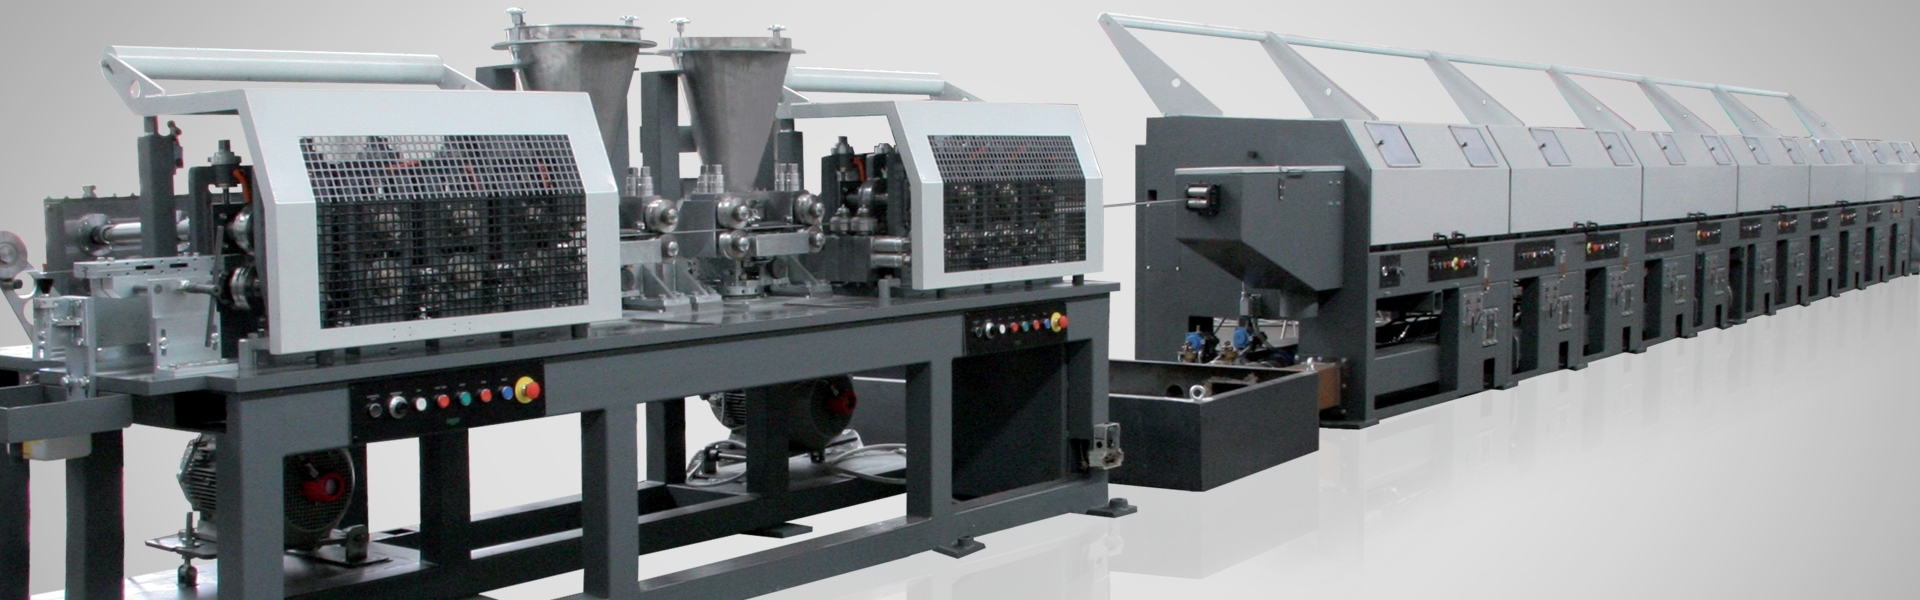 FLUX-CORED WIRE PRODUCTION LINES